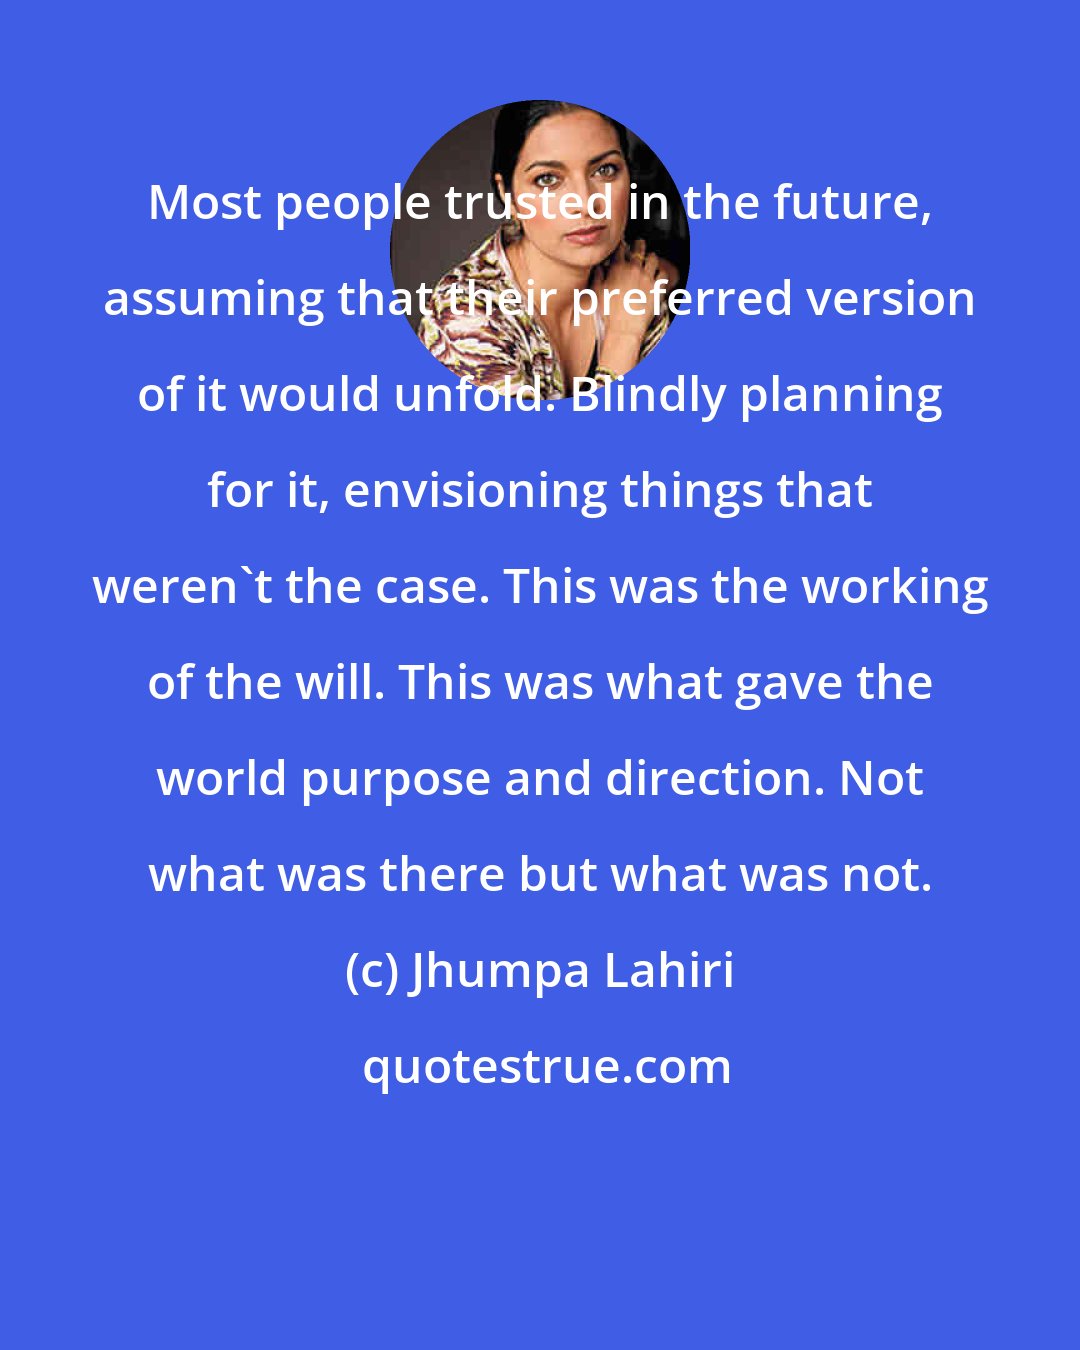 Jhumpa Lahiri: Most people trusted in the future, assuming that their preferred version of it would unfold. Blindly planning for it, envisioning things that weren't the case. This was the working of the will. This was what gave the world purpose and direction. Not what was there but what was not.